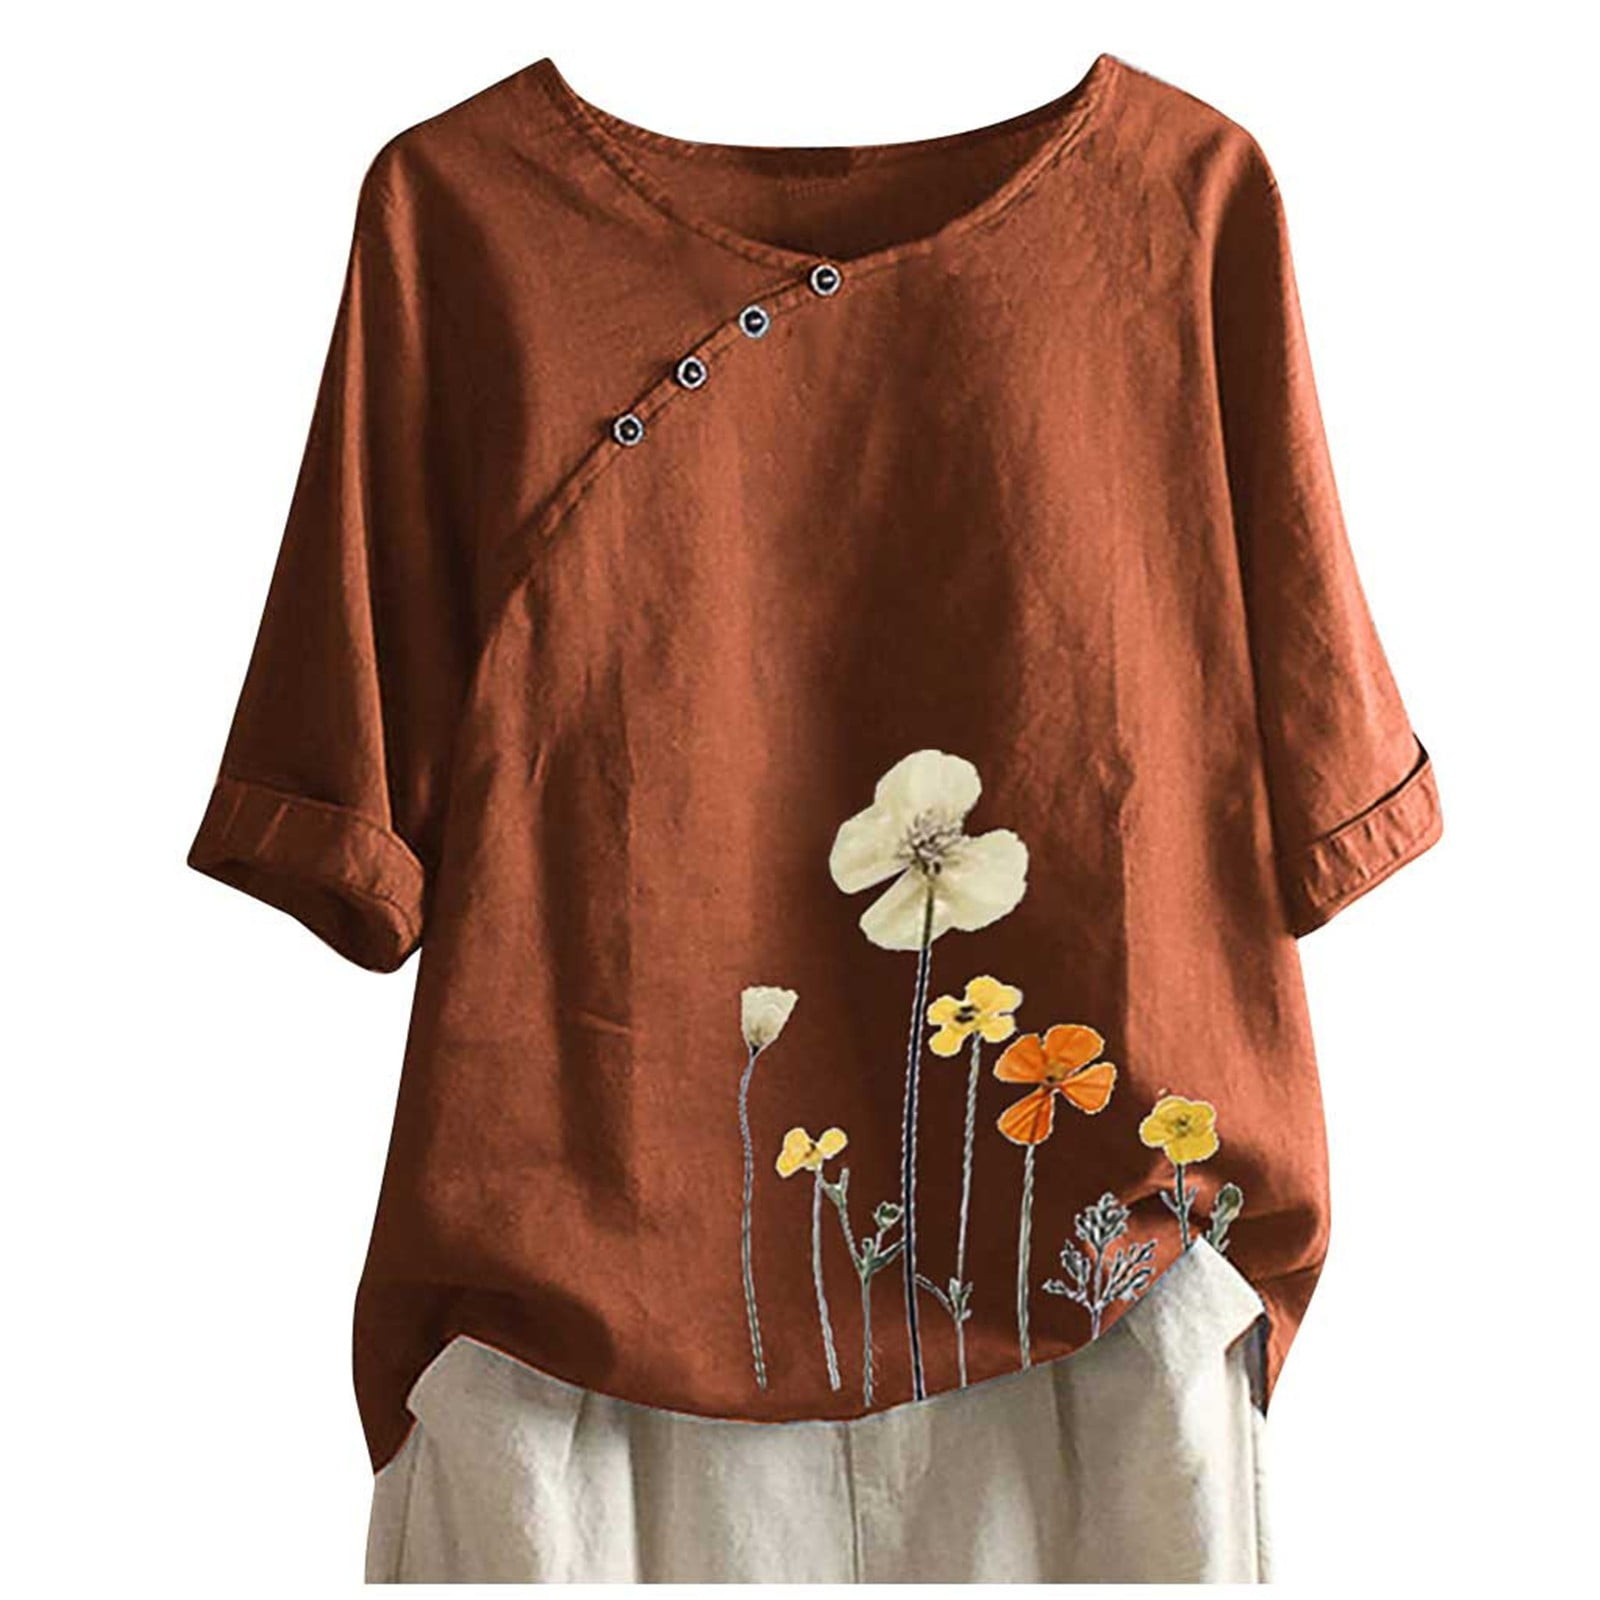 Womens XL tunic daisy t-shirt orange appliqued beach cover up hand painted